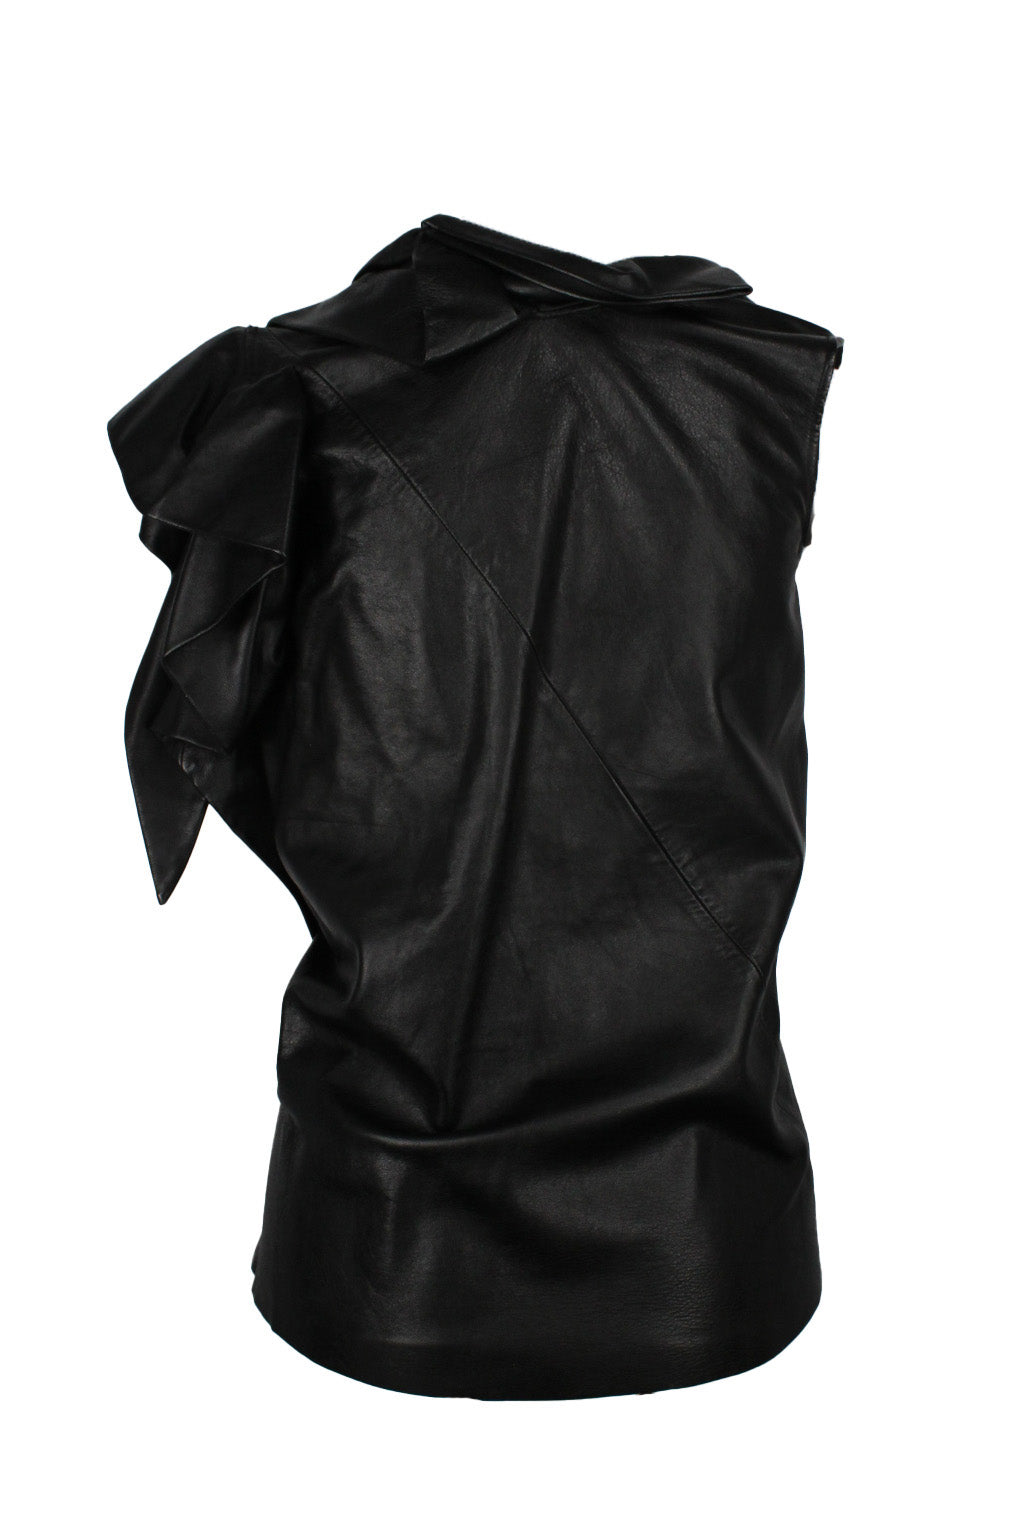 description: vintage black leather sleeveless open back top. features draped leather design at left side, open back with zipper closure at center front, and long silhouette. 